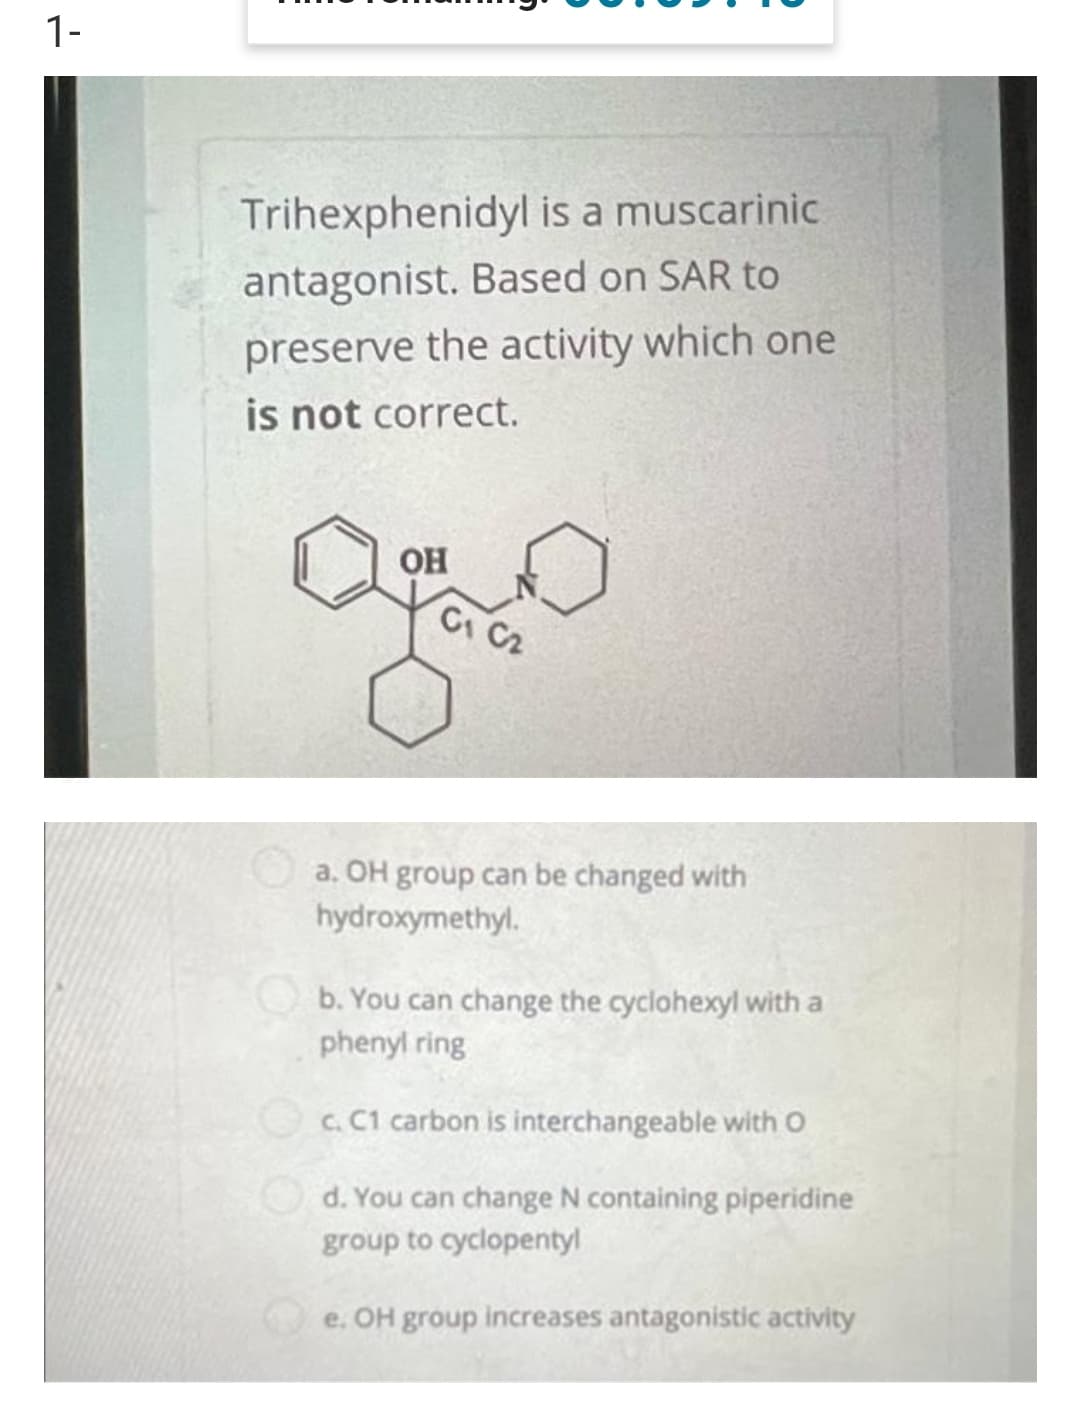 1-
Trihexphenidyl is a muscarinic
antagonist. Based on SAR to
preserve the activity which one
is not correct.
OH
Of C
a. OH group can be changed with
hydroxymethyl.
b. You can change the cyclohexyl with a
phenyl ring
c. C1 carbon is interchangeable with O
d. You can change N containing piperidine
group to cyclopentyl
e. OH group increases antagonistic activity